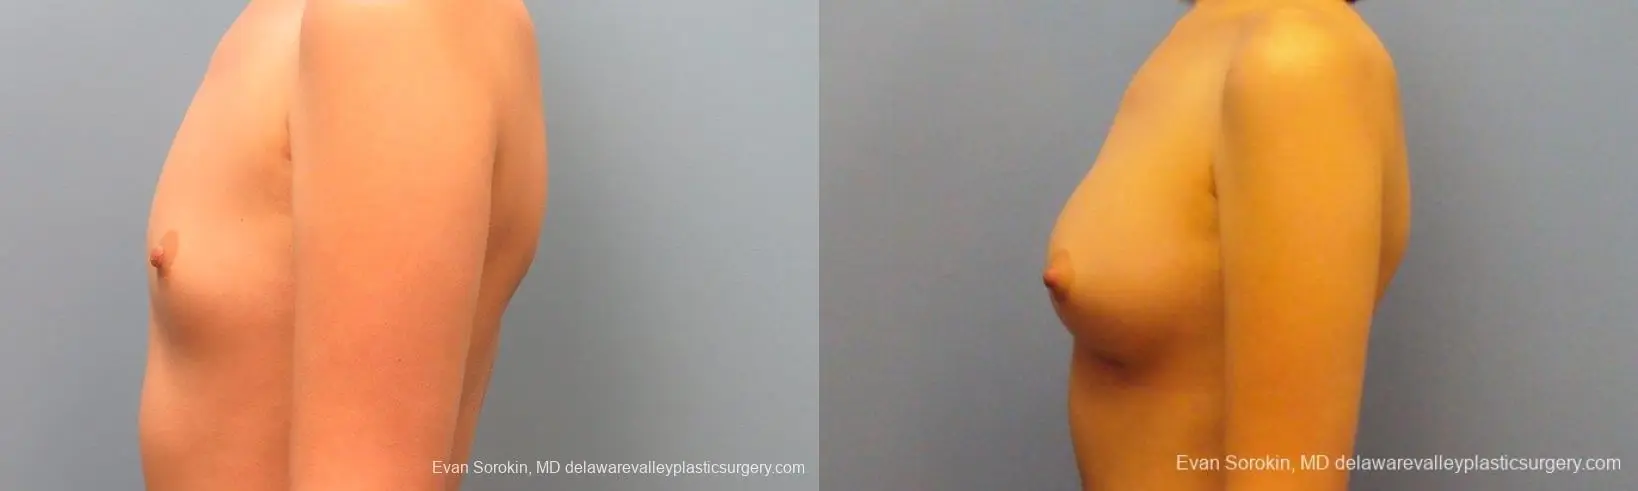 Philadelphia Breast Augmentation 10113 - Before and After 5